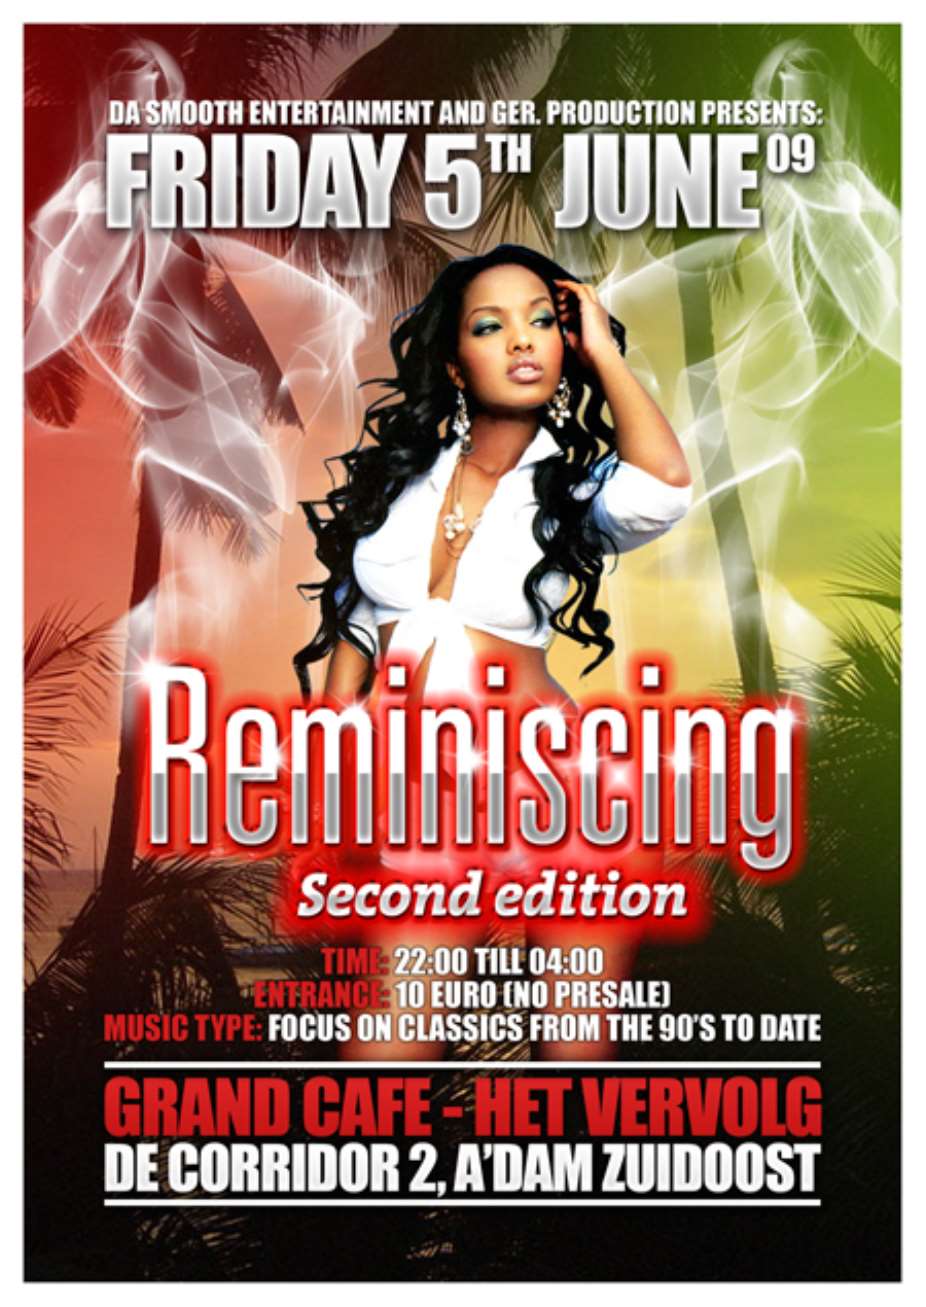 Da Smooth Entertainment Presents Friday 5th June 2009 Reminiscing